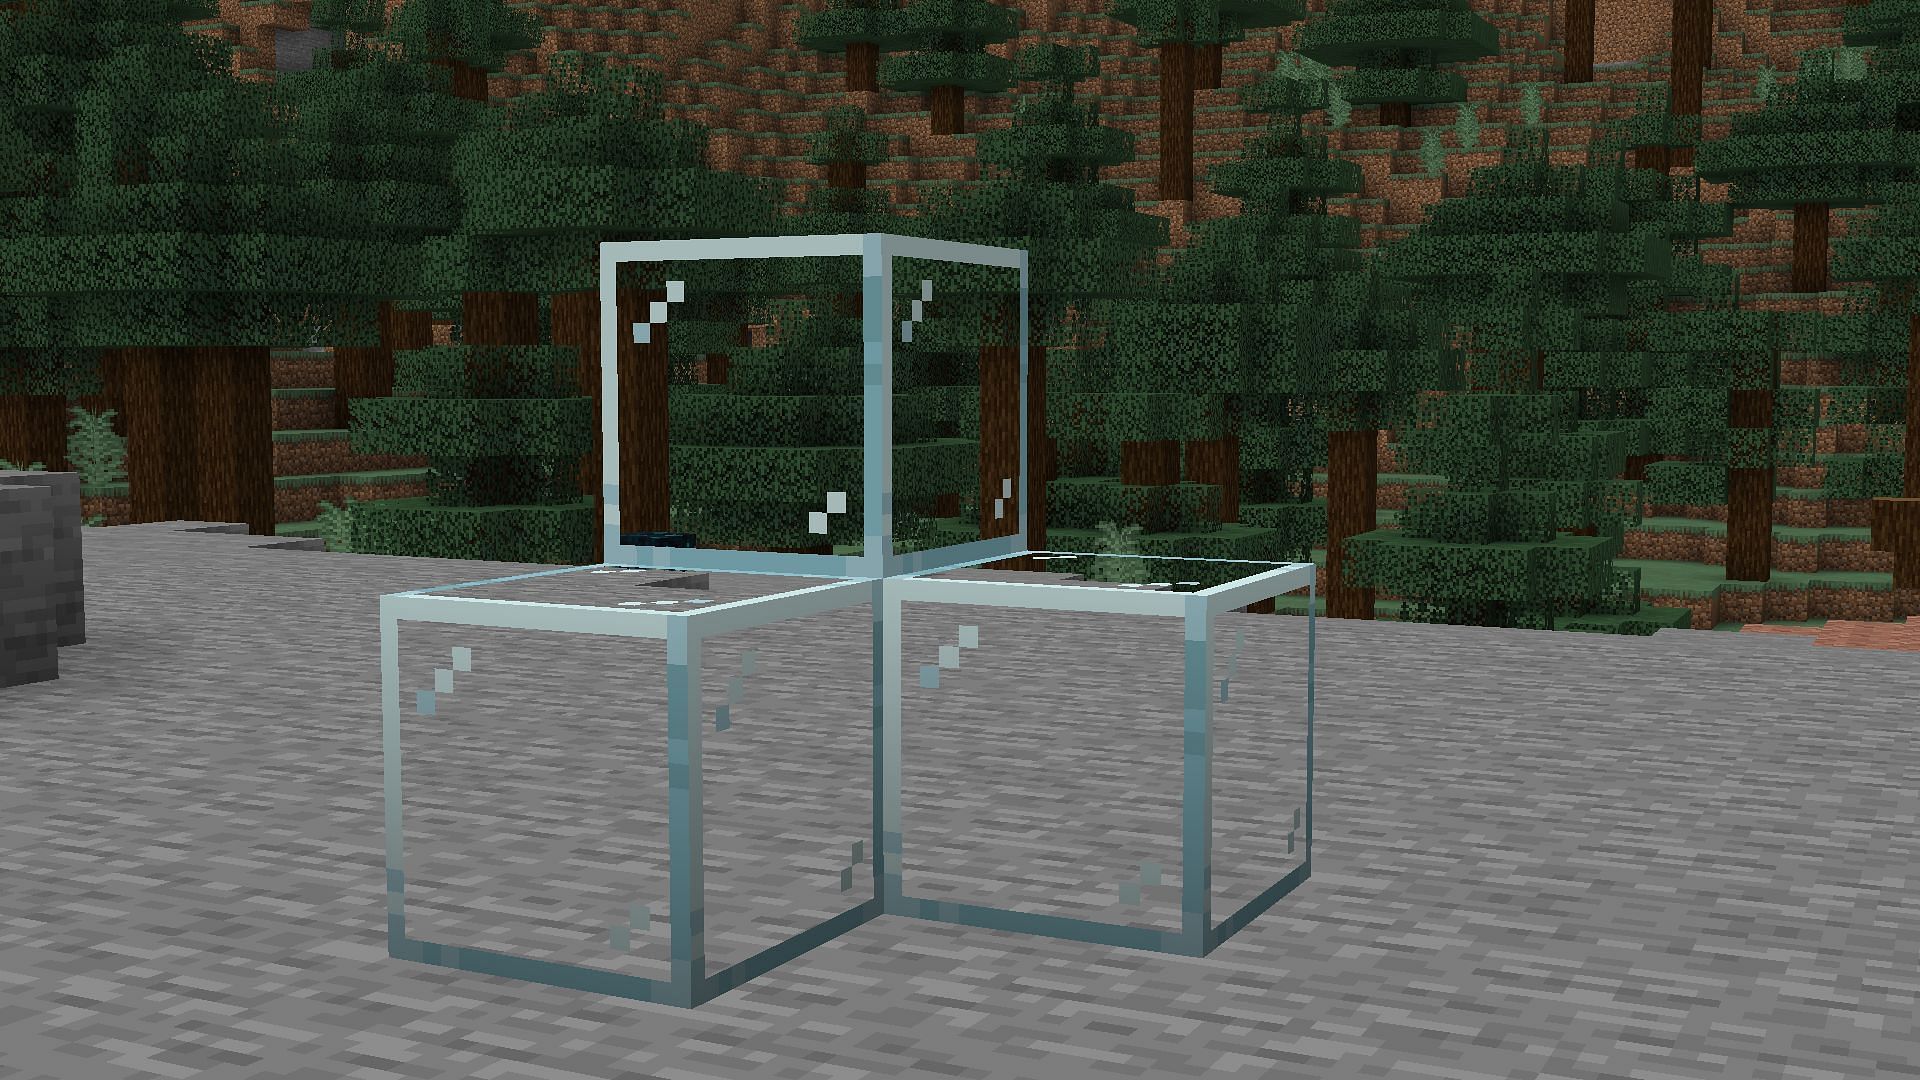 Glass is also frequently used in many structures in Minecraft (Image via Mojang)